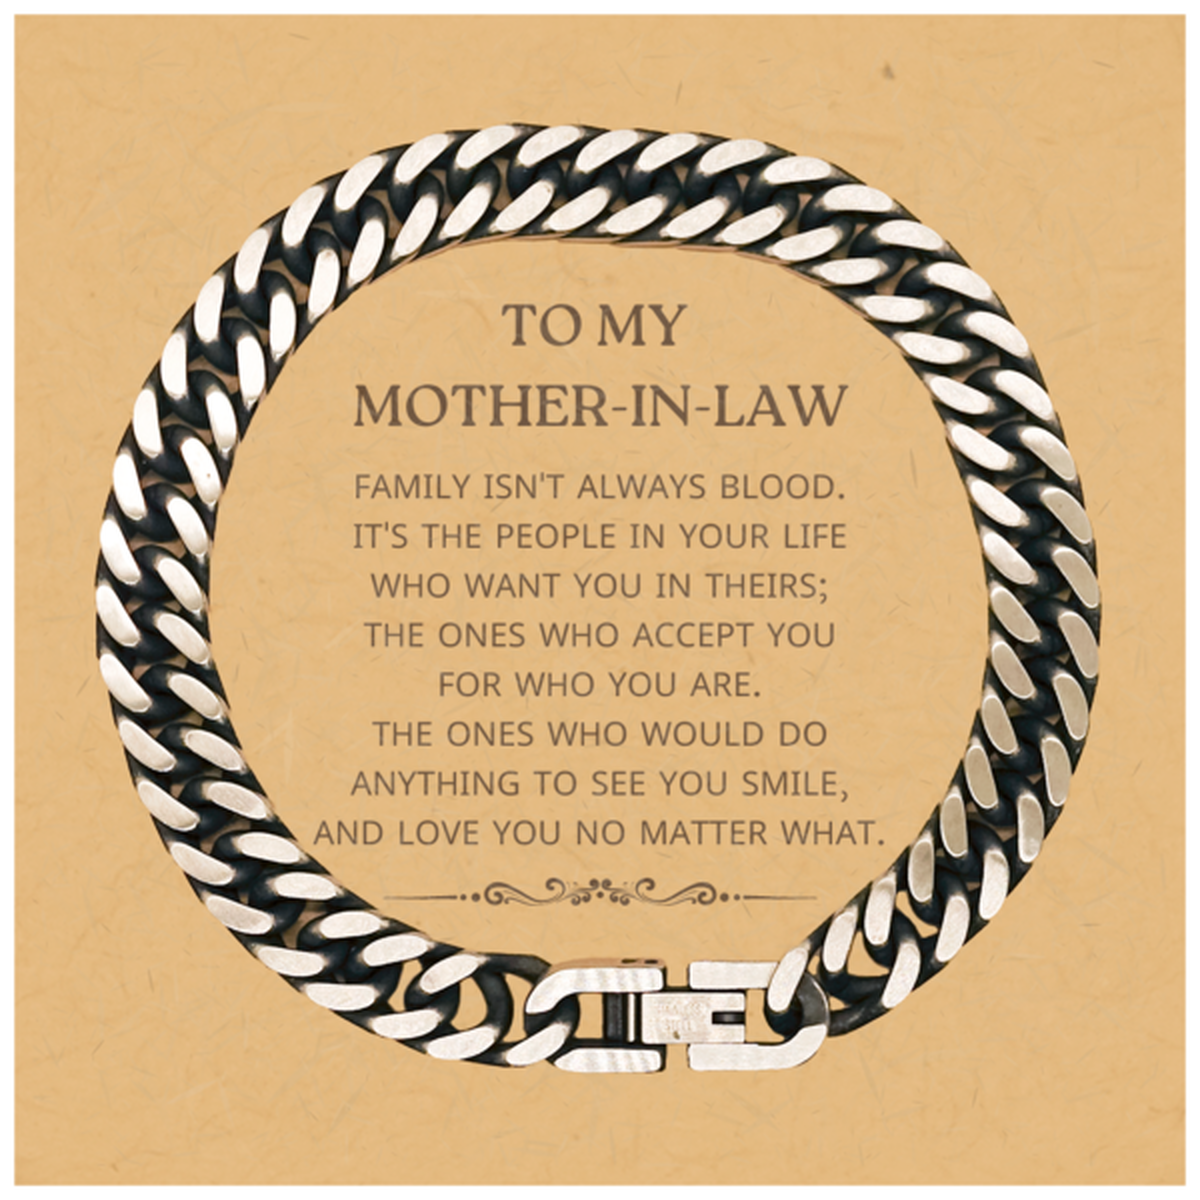 To My Mother-In-Law Gifts, Family isn't always blood, Mother-In-Law Cuban Link Chain Bracelet, Birthday Christmas Unique Present For Mother-In-Law